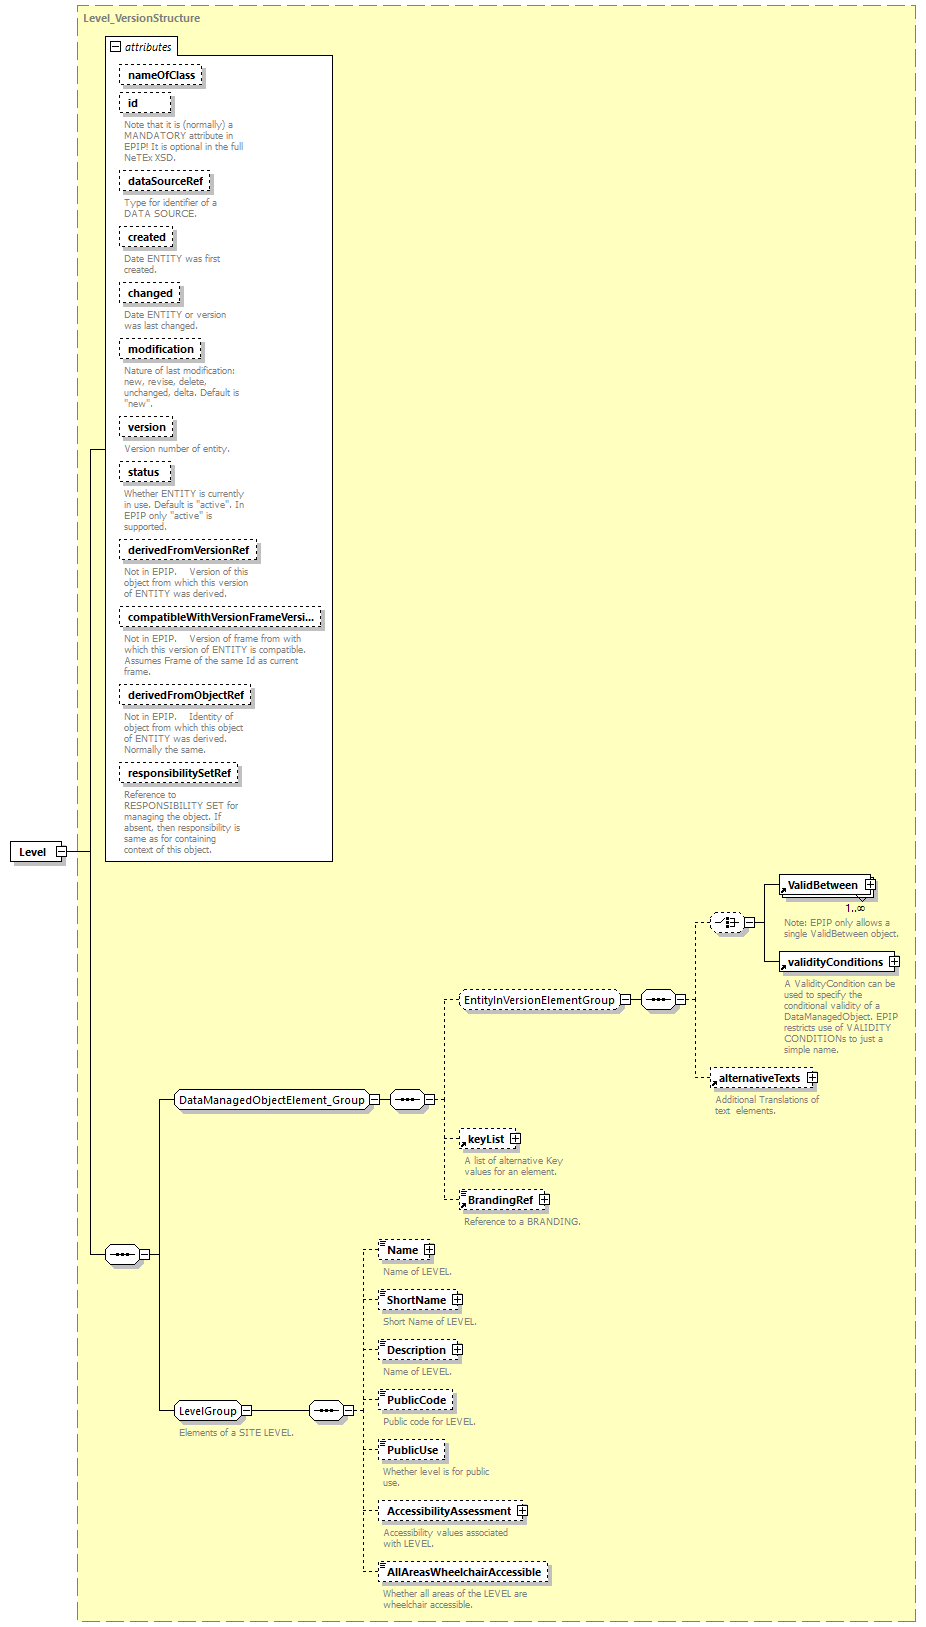 reduced_diagrams/reduced_p230.png